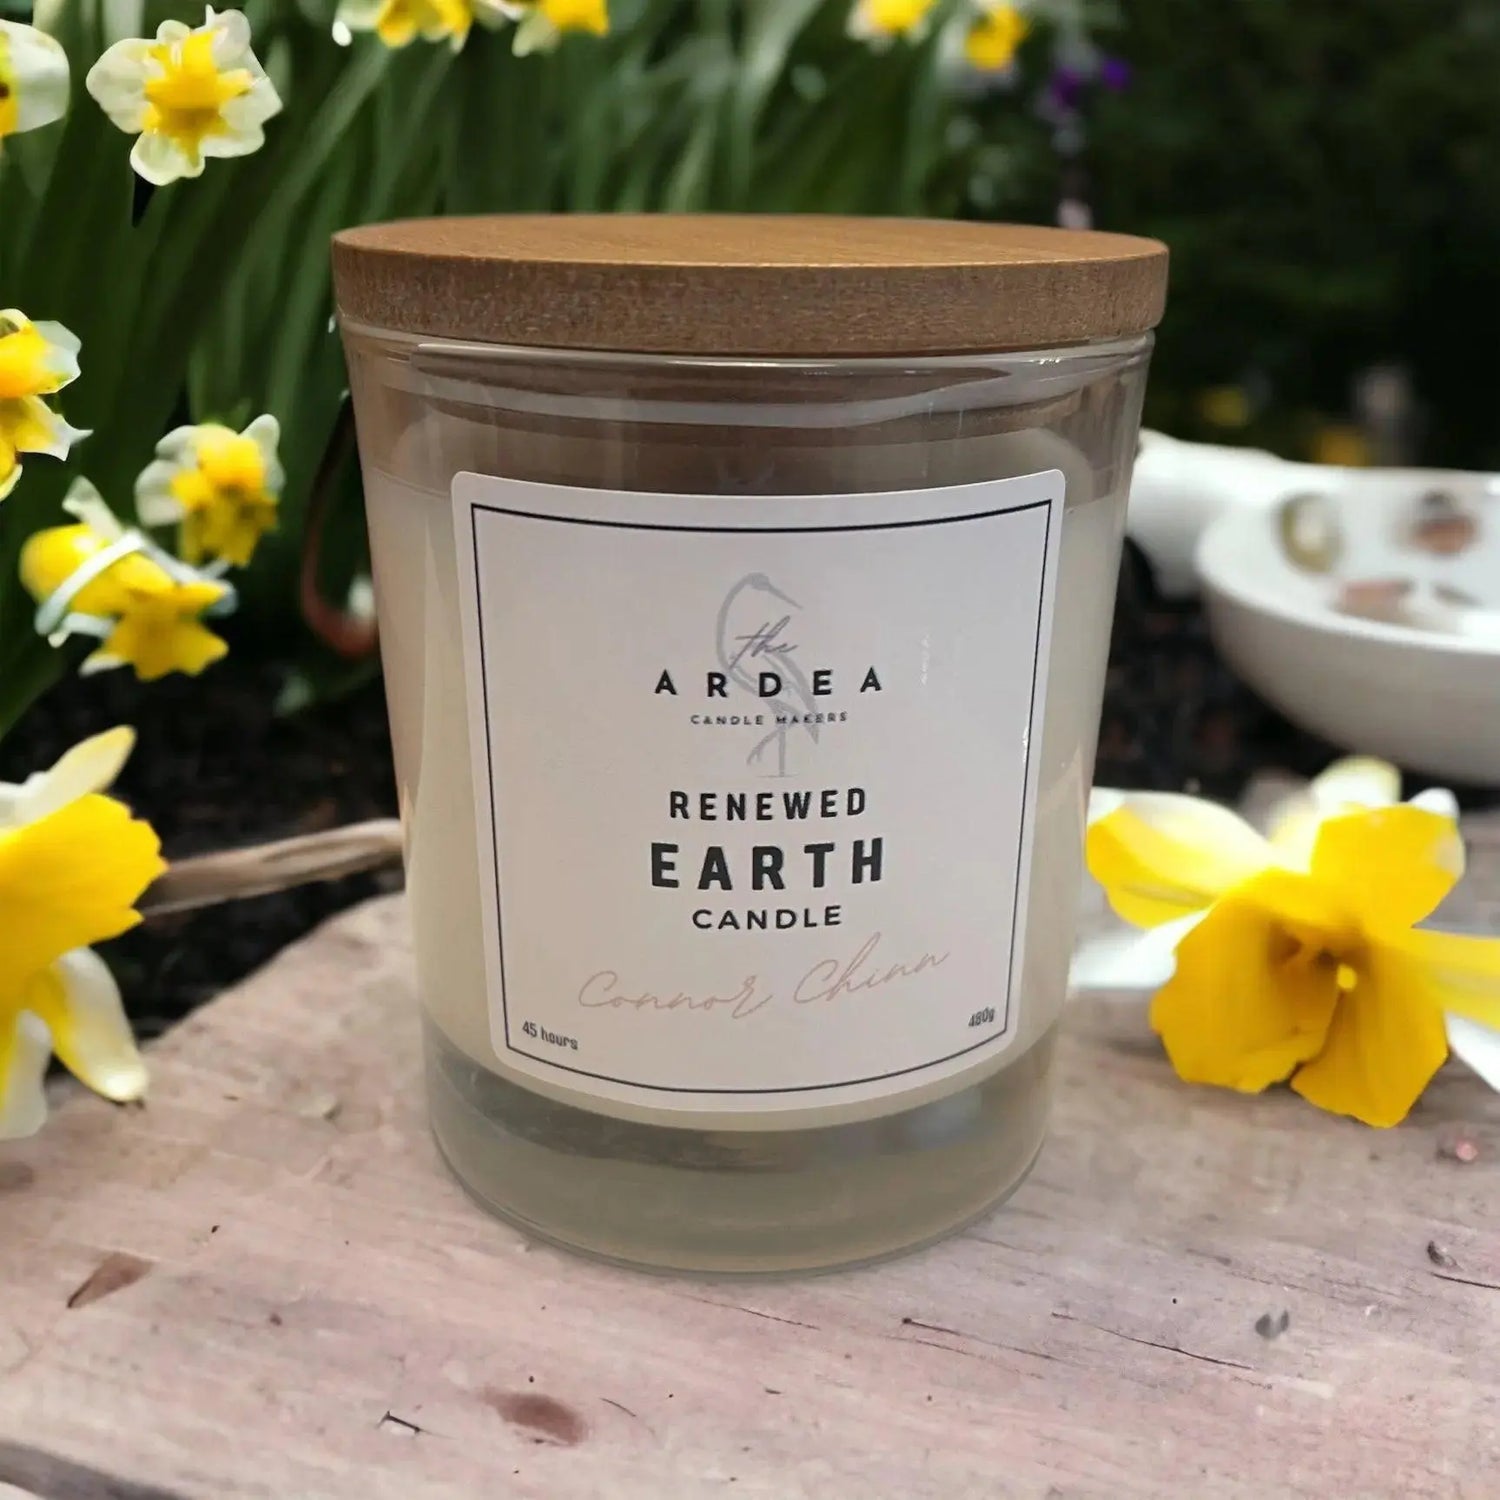 Renewed Earth Candle - 600g - The Ardea Candle Makers